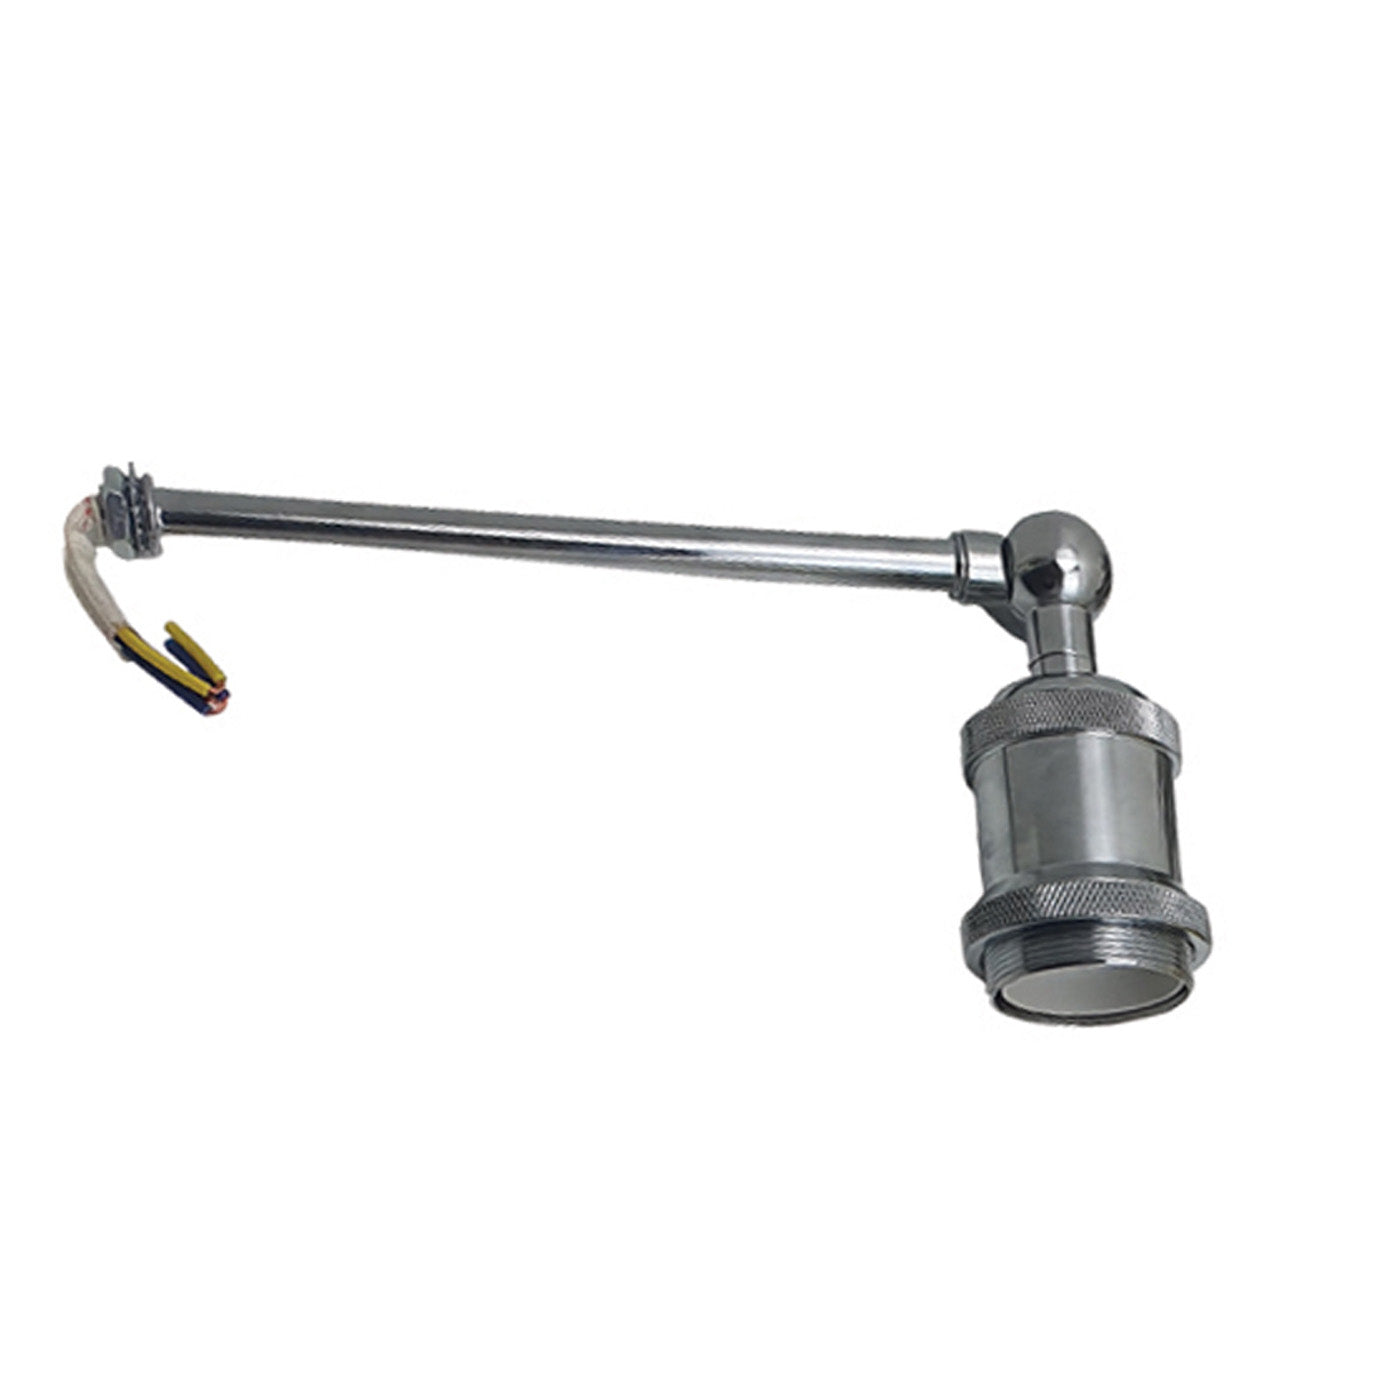 Long Arm With Short Holder Wall Light